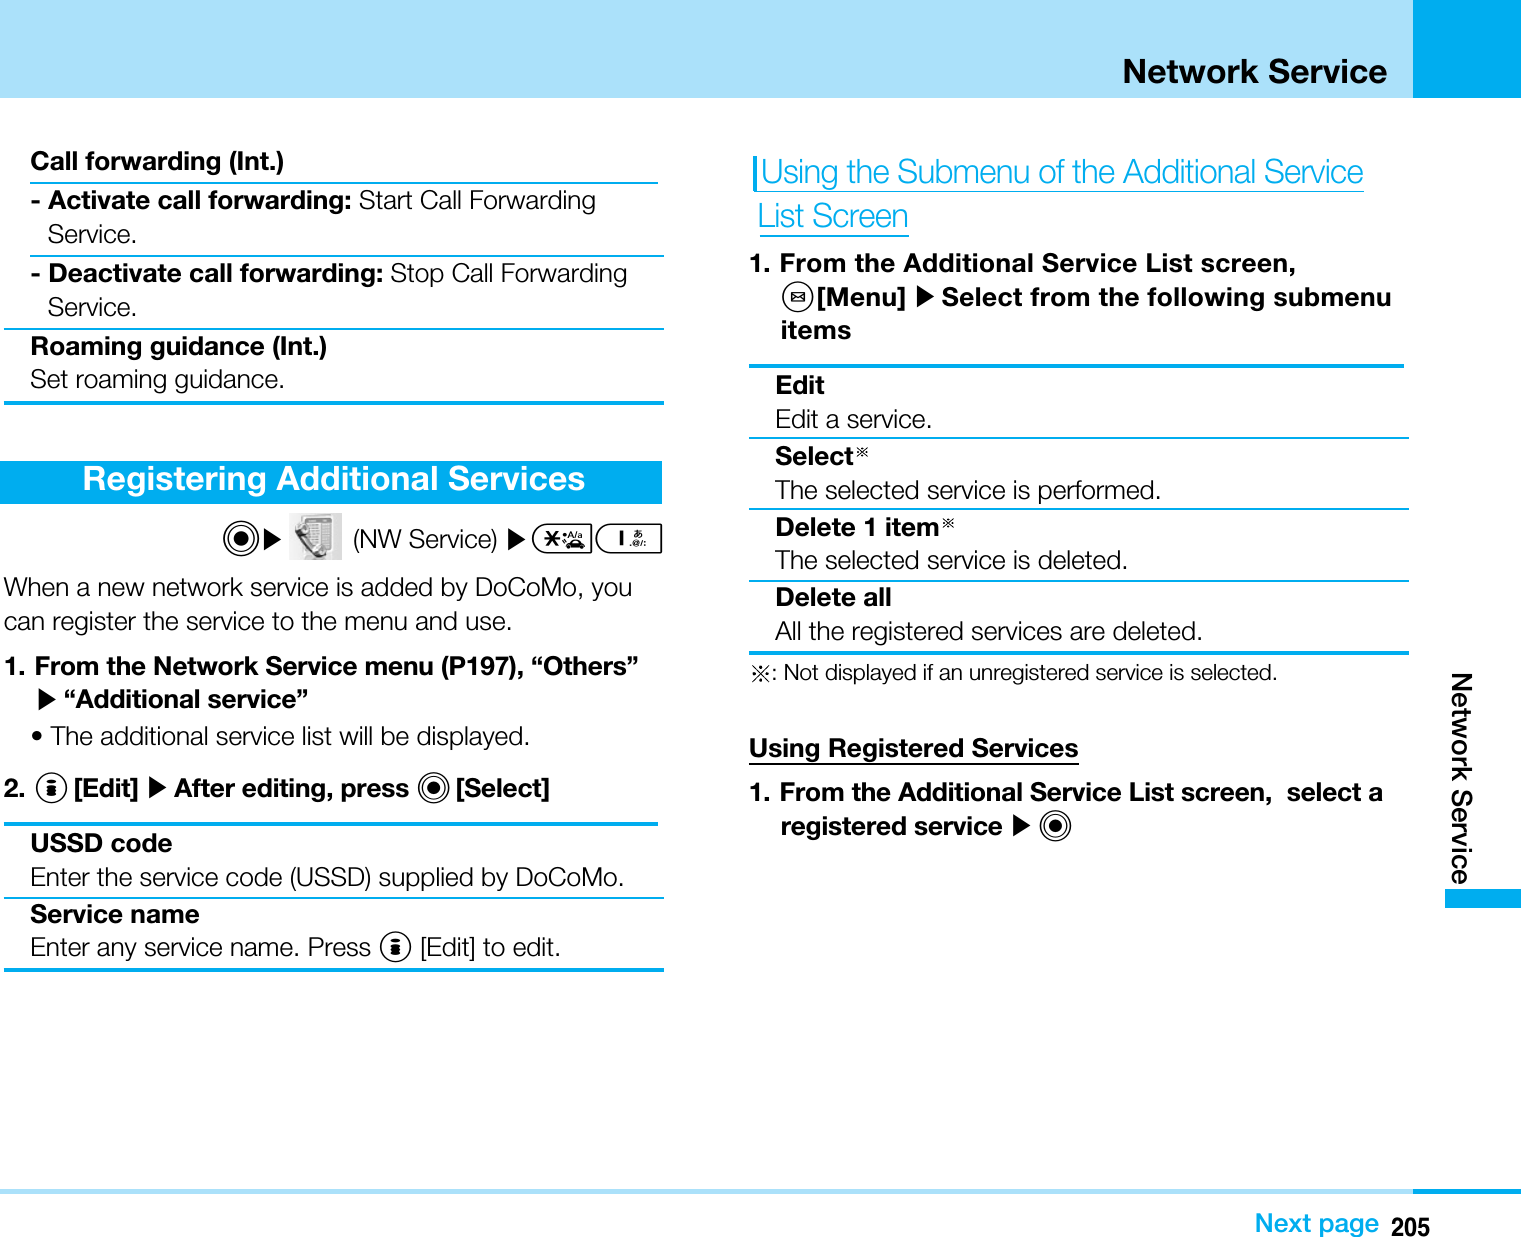 205Network ServiceNext page Network ServiceCall forwarding (Int.)- Activate call forwarding: Start Call ForwardingService.- Deactivate call forwarding: Stop Call ForwardingService.Roaming guidance (Int.)Set roaming guidance.Registering Additional ServicesC](NW Service) ]*1When a new network service is added by DoCoMo, youcan register the service to the menu and use.1. From the Network Service menu (P197), “Others”]“Additional service”• The additional service list will be displayed.2. I[Edit] ]After editing, press C[Select]USSD codeEnter the service code (USSD) supplied by DoCoMo.Service nameEnter any service name. Press I[Edit] to edit.Using the Submenu of the Additional Service List Screen1. From the Additional Service List screen,M[Menu] ]Select from the following submenuitemsEditEdit a service.SelectThe selected service is performed.Delete 1 itemThe selected service is deleted.Delete allAll the registered services are deleted.: Not displayed if an unregistered service is selected.Using Registered Services1. From the Additional Service List screen, select aregistered service ]C